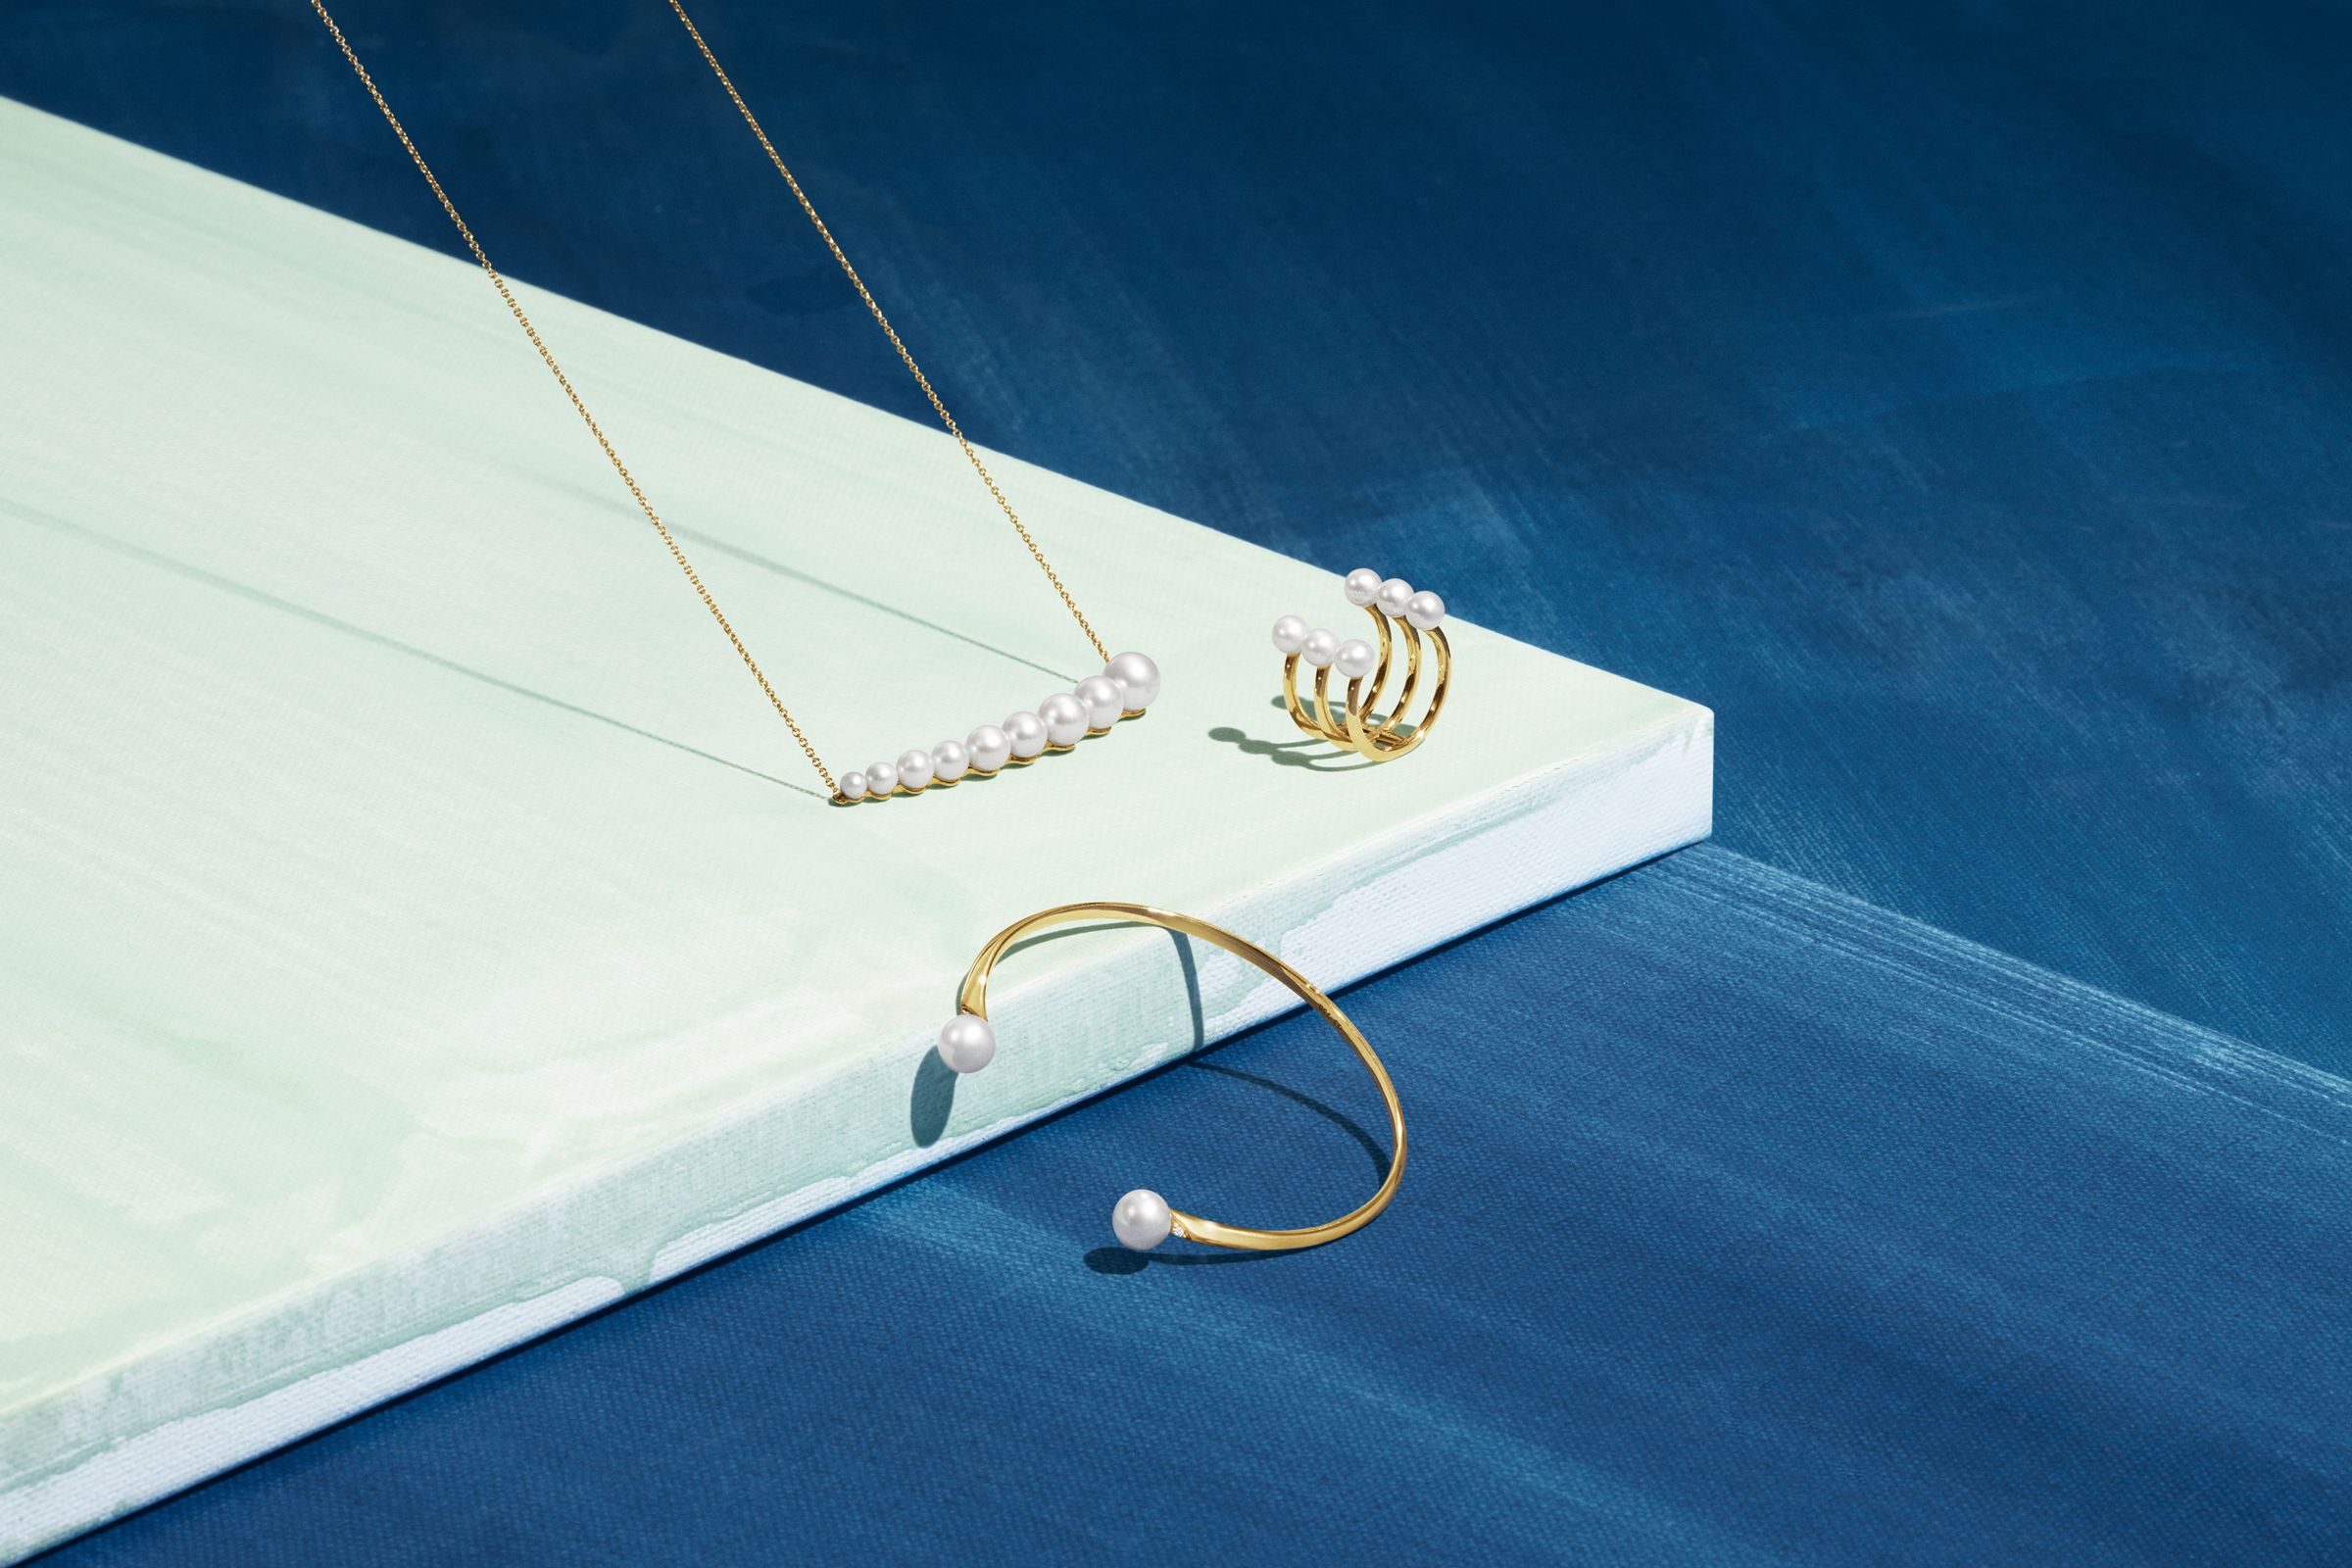 Georg Jensen still life jewelry photography for campaign